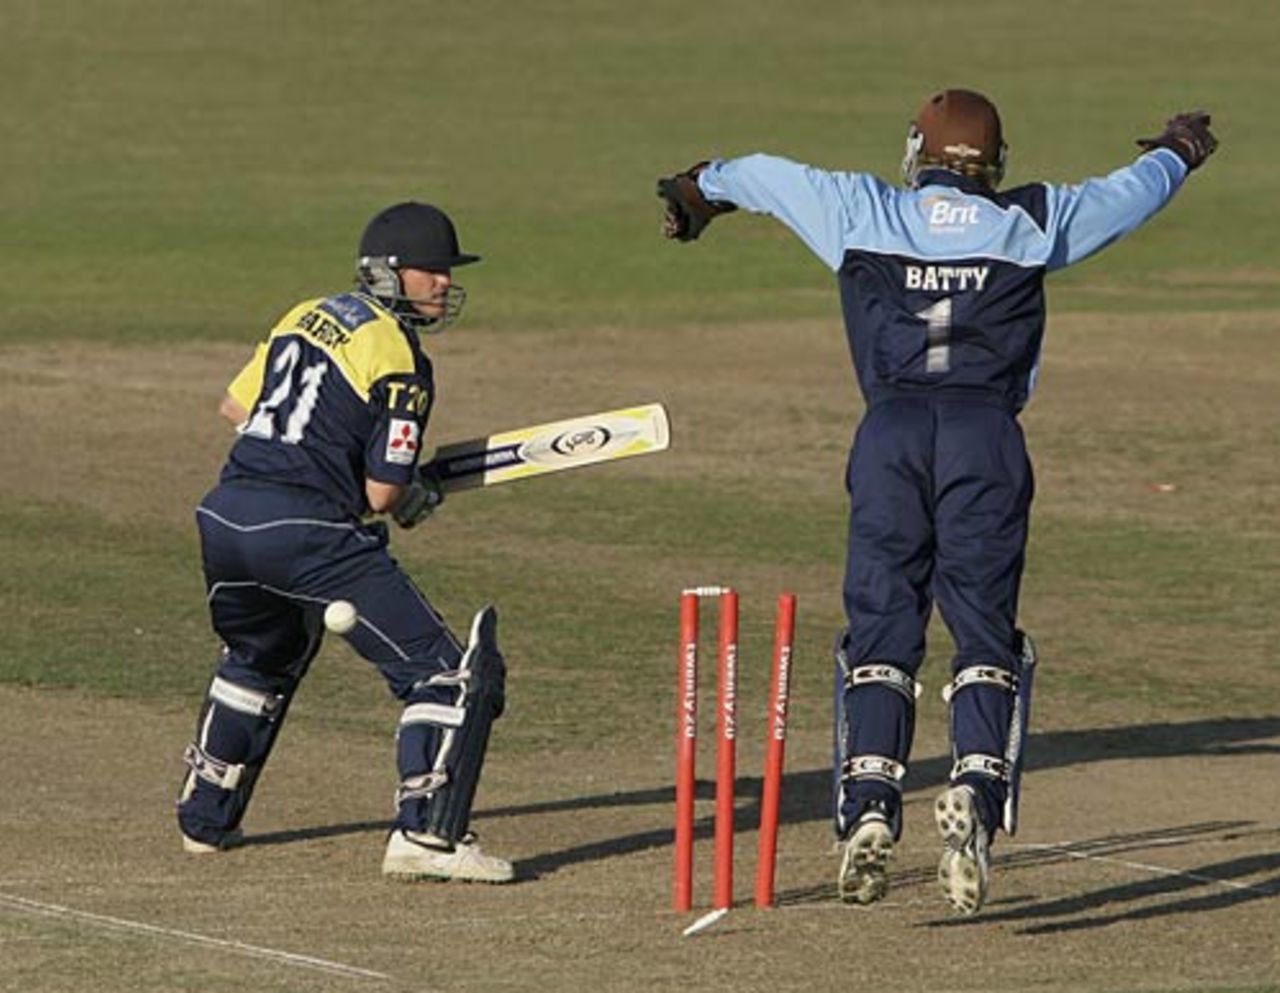 Ian Harvey is bowled by Anil Kumble as Surrey get close to victory, Gloucestershire v Surrey, Twenty20 Quarter-final, Bristol, July 24, 2006